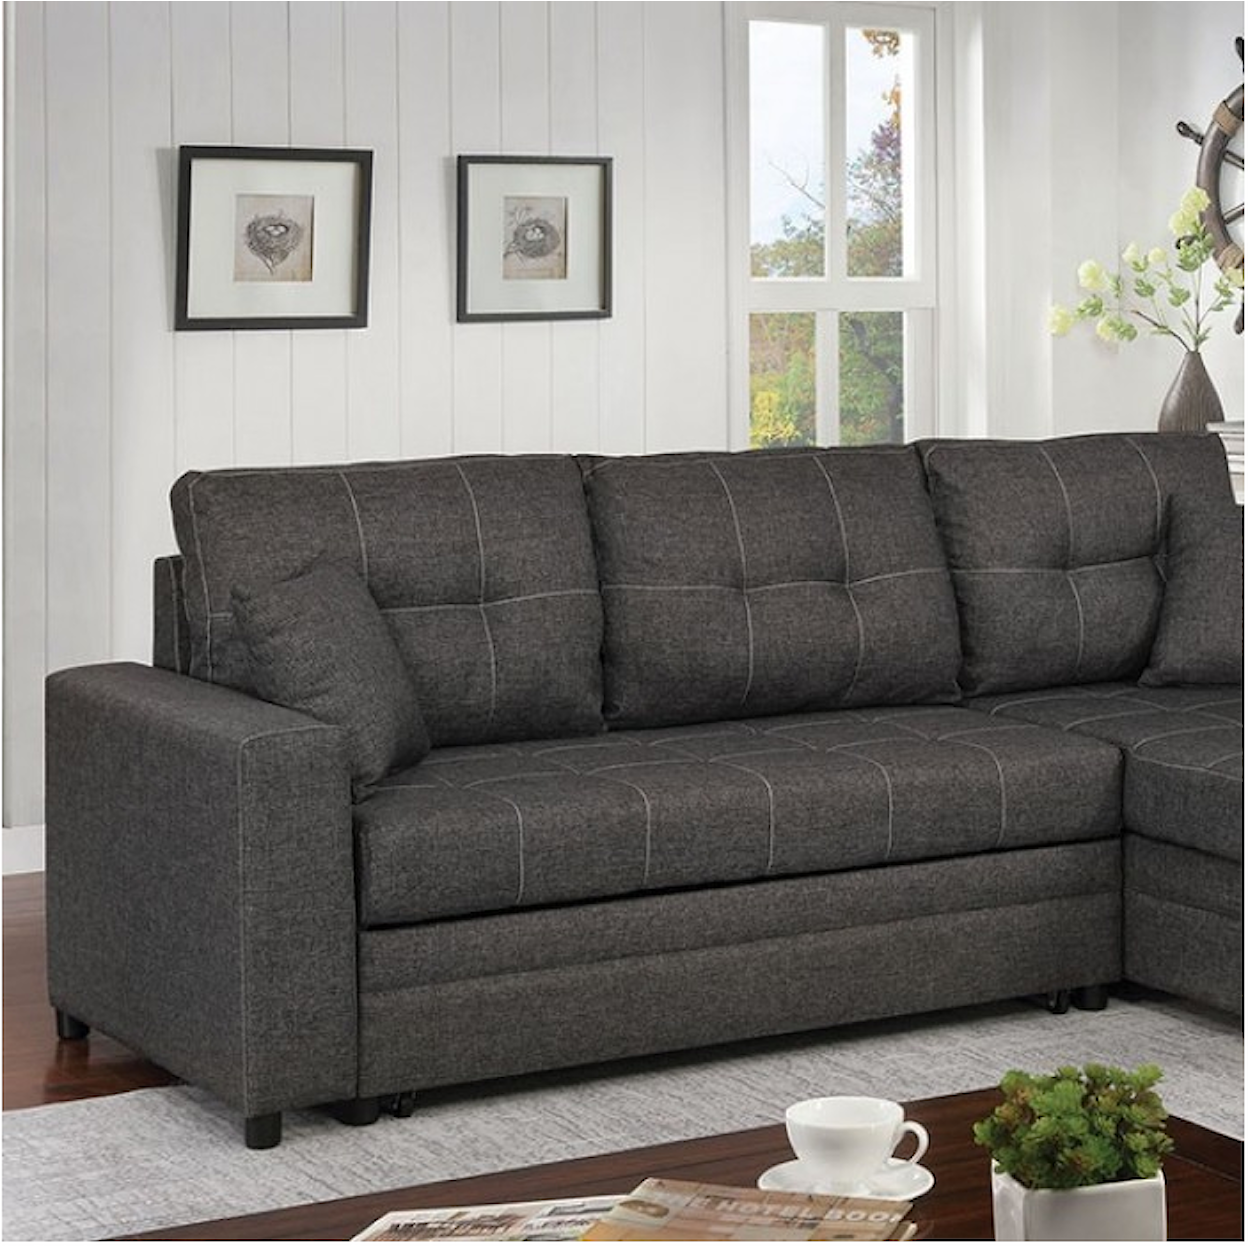 FUSA Vide Sectional Sofabed Chaise